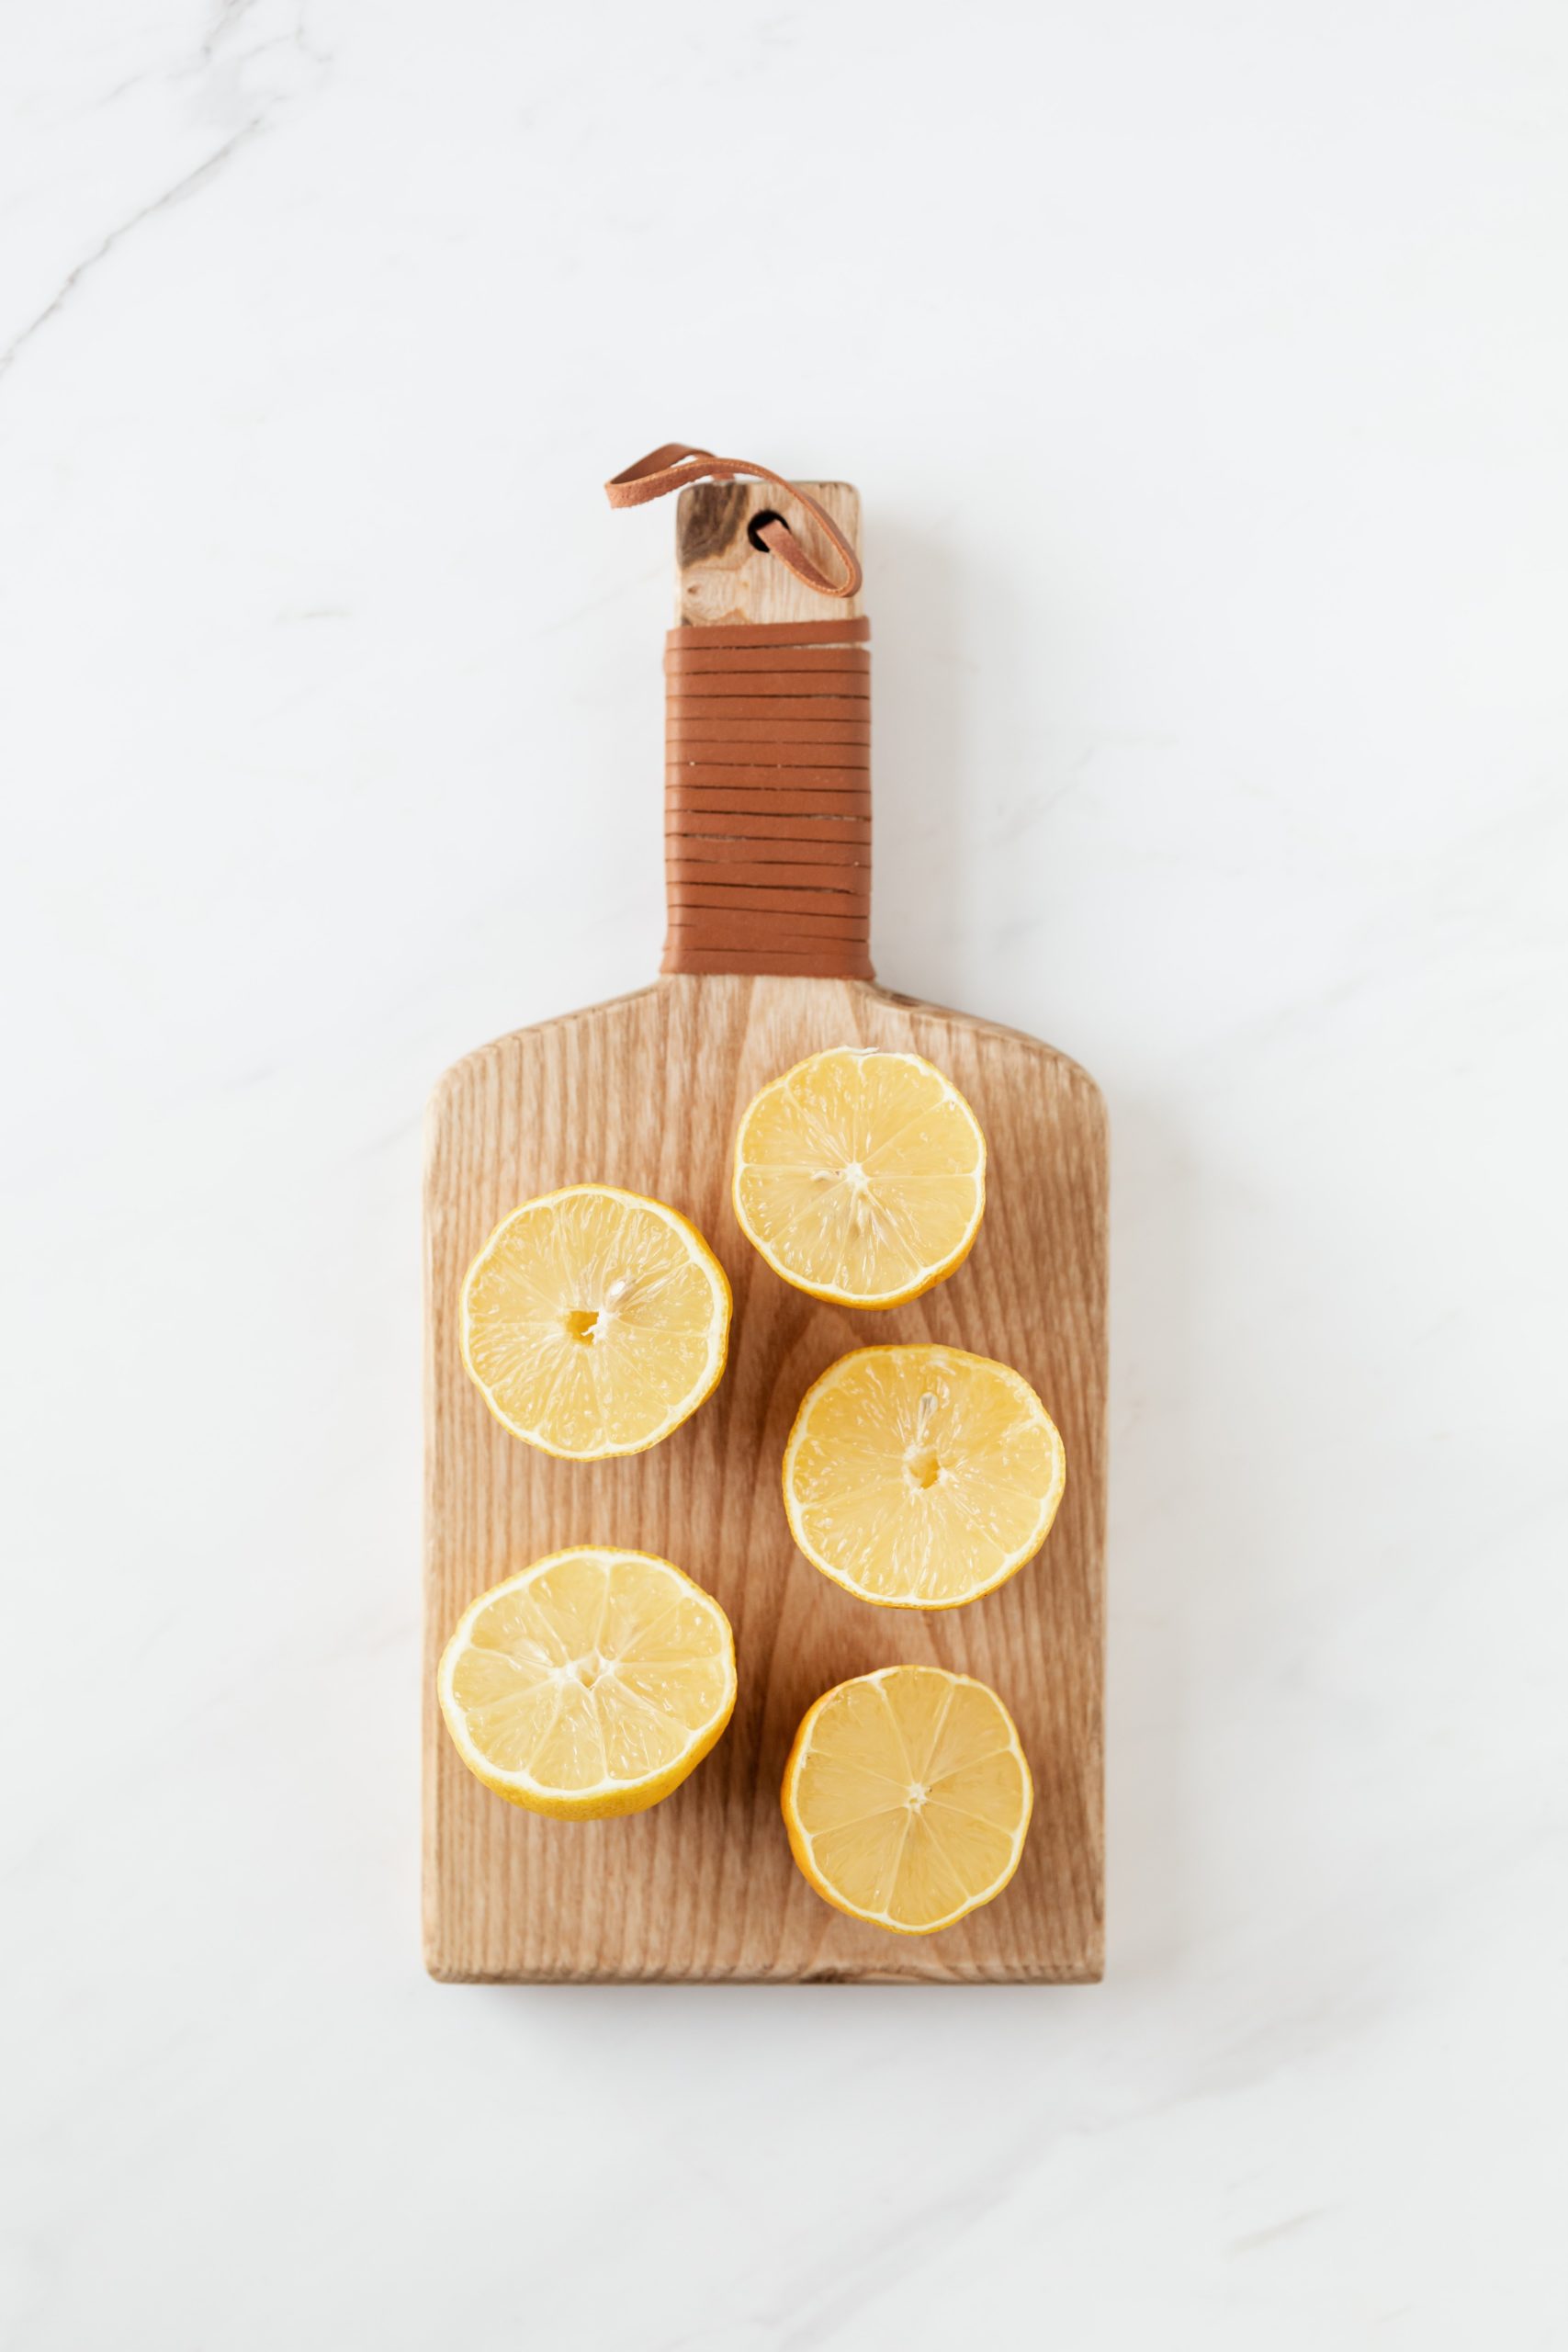 Surprising Secrets To Choosing The Perfect Cutting Board For Making Cocktails At Home